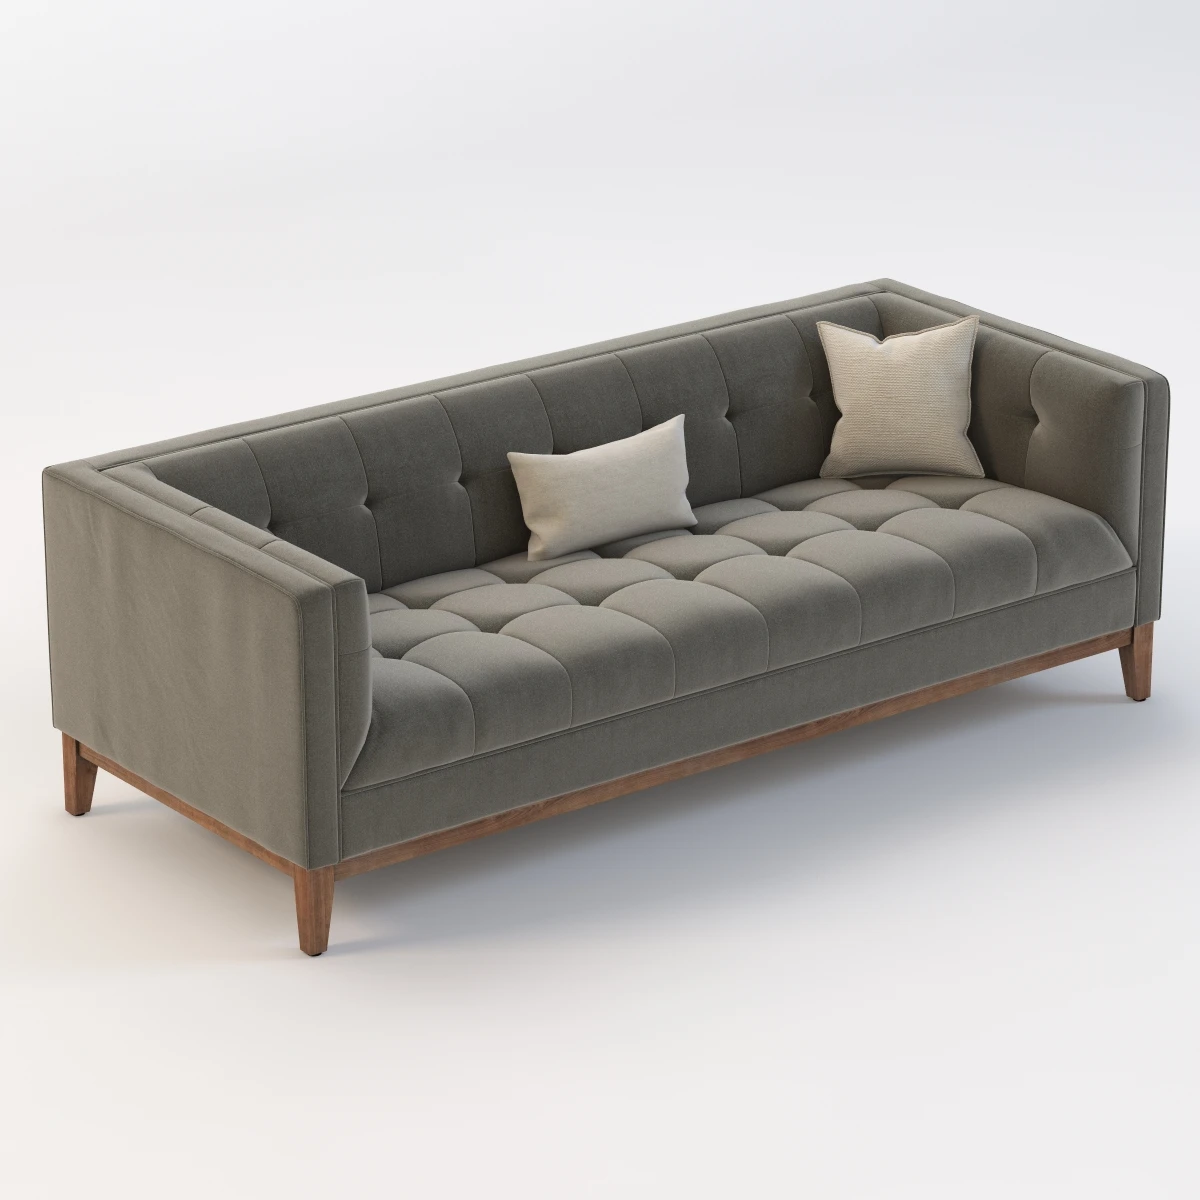 Gus Modern Atwood 3 Seater Sofa 3D Model_06